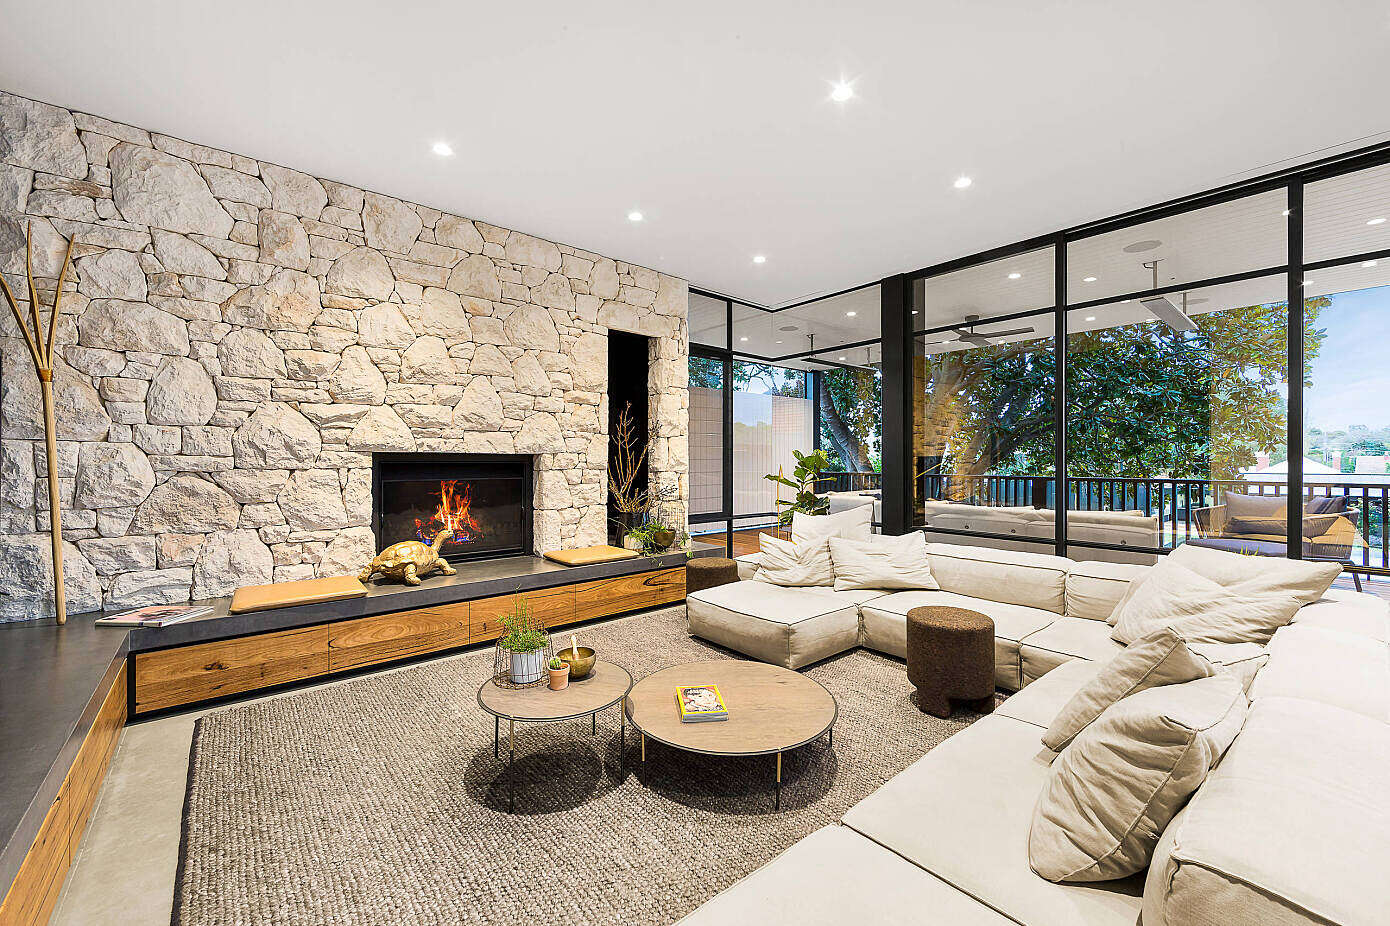 Home in Hampton by Integrated Technologies Australia